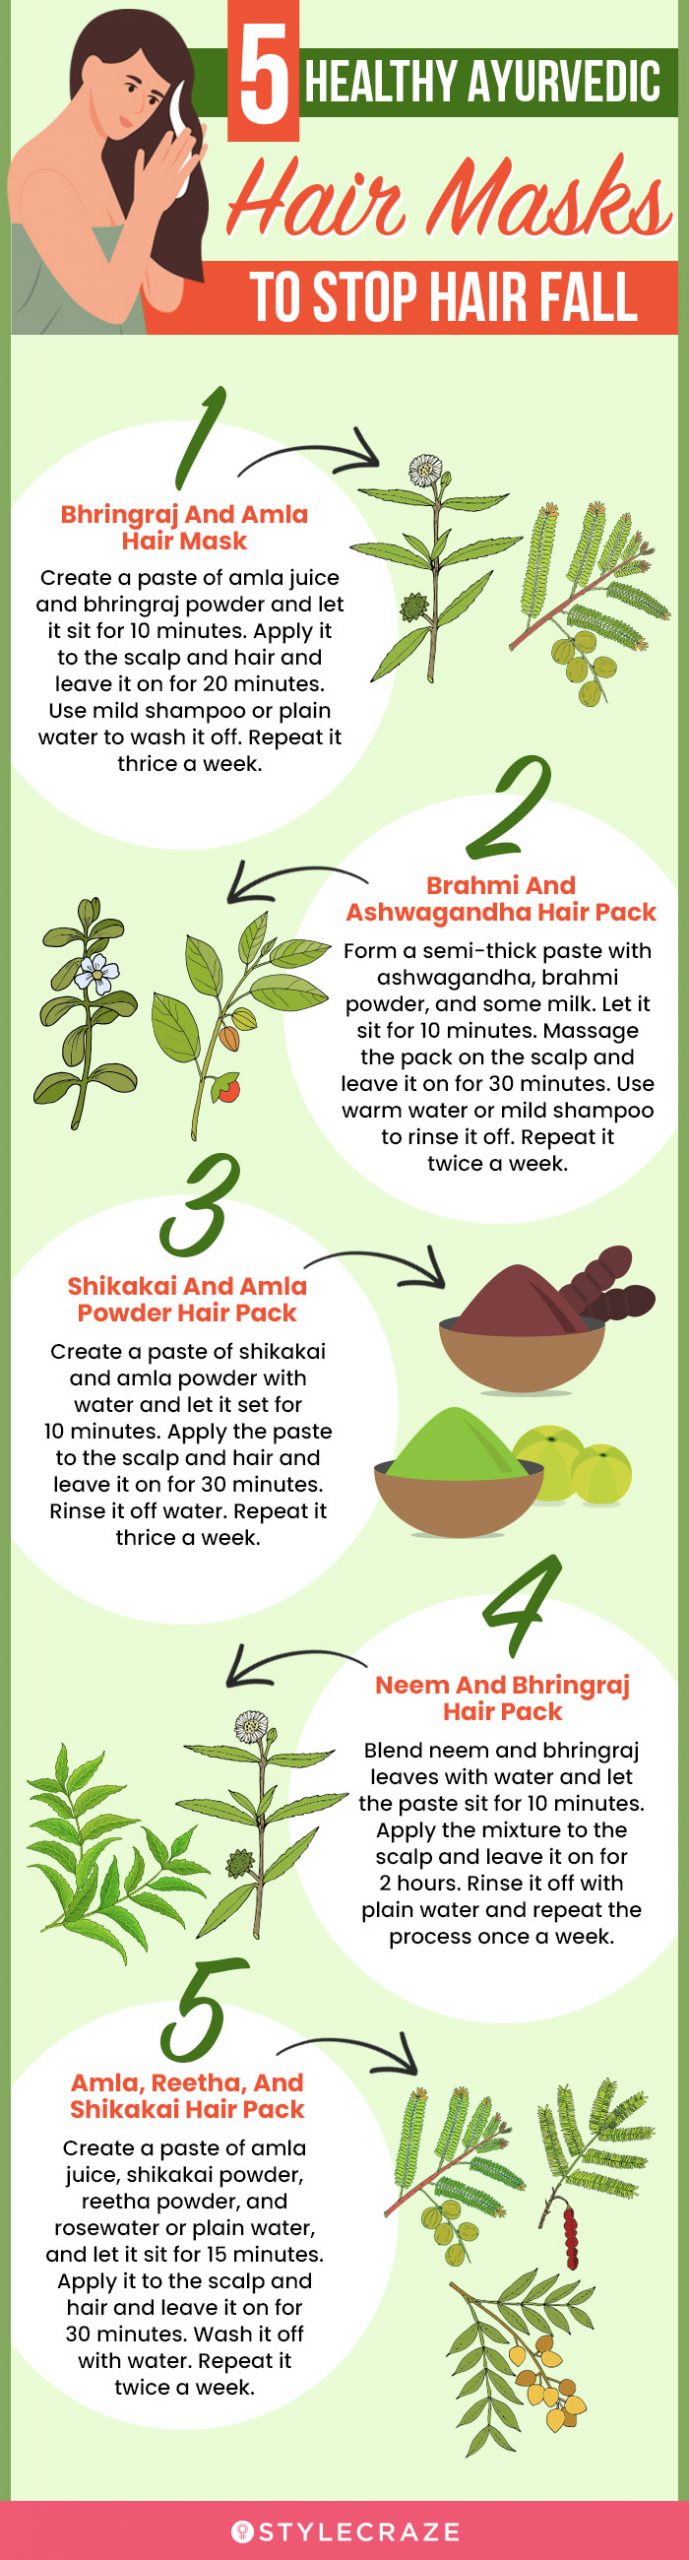 5 healthy ayurvedic hair masks to stop hair fall (infographic)